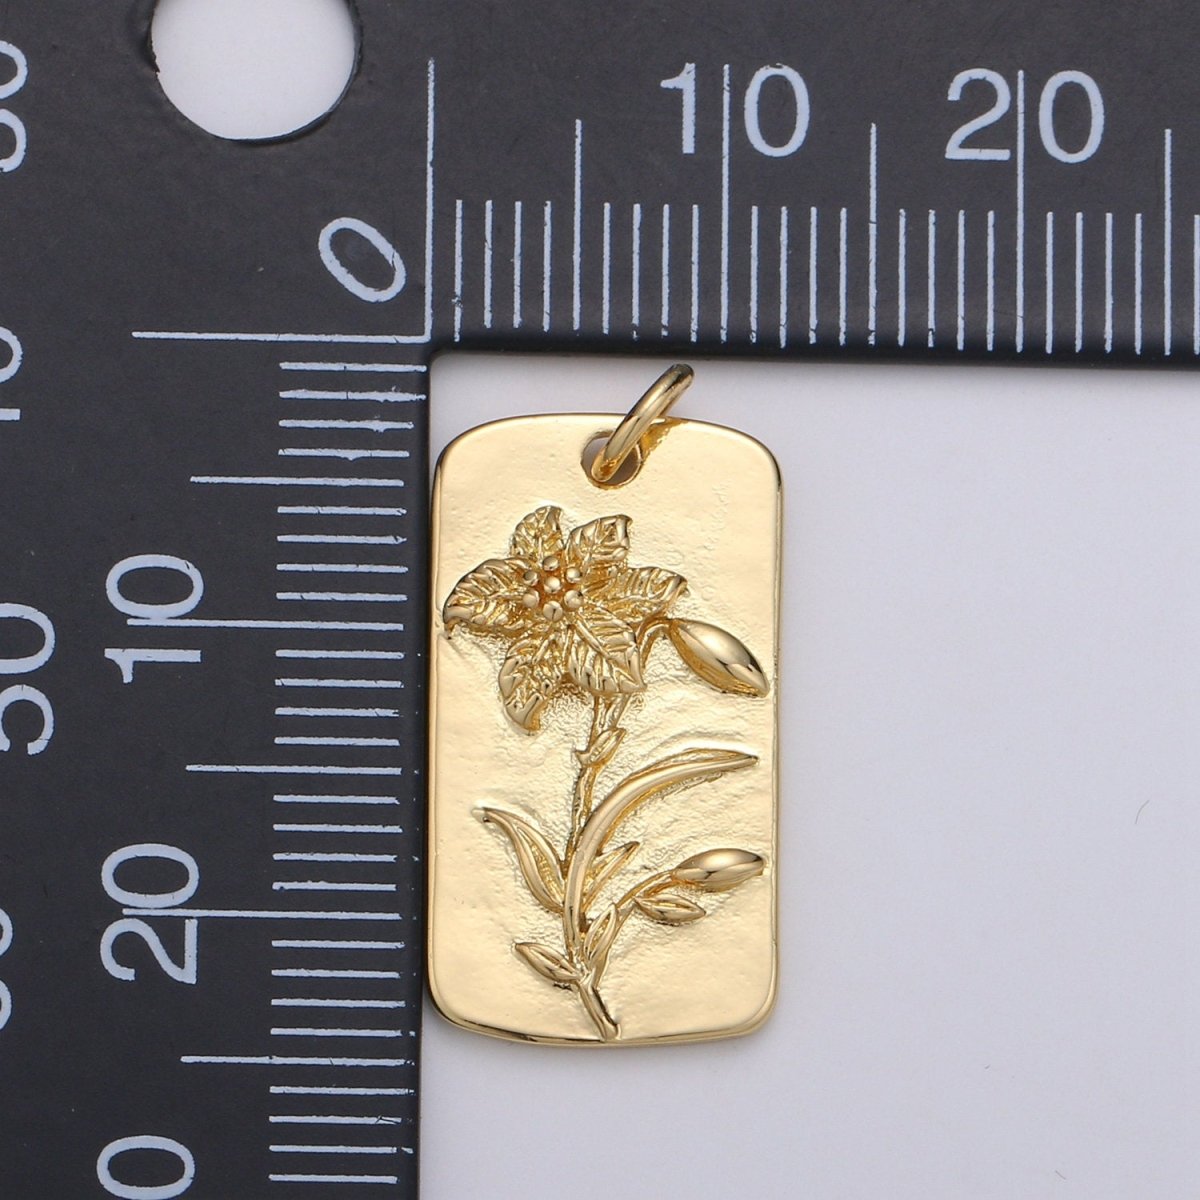 Narcissus Flower Charms, Gold Narcissus Pendant, Dainty Narcissus Charm, Small Wild Flower Charm for Necklace Floral Flower Jewelry D-754 - DLUXCA